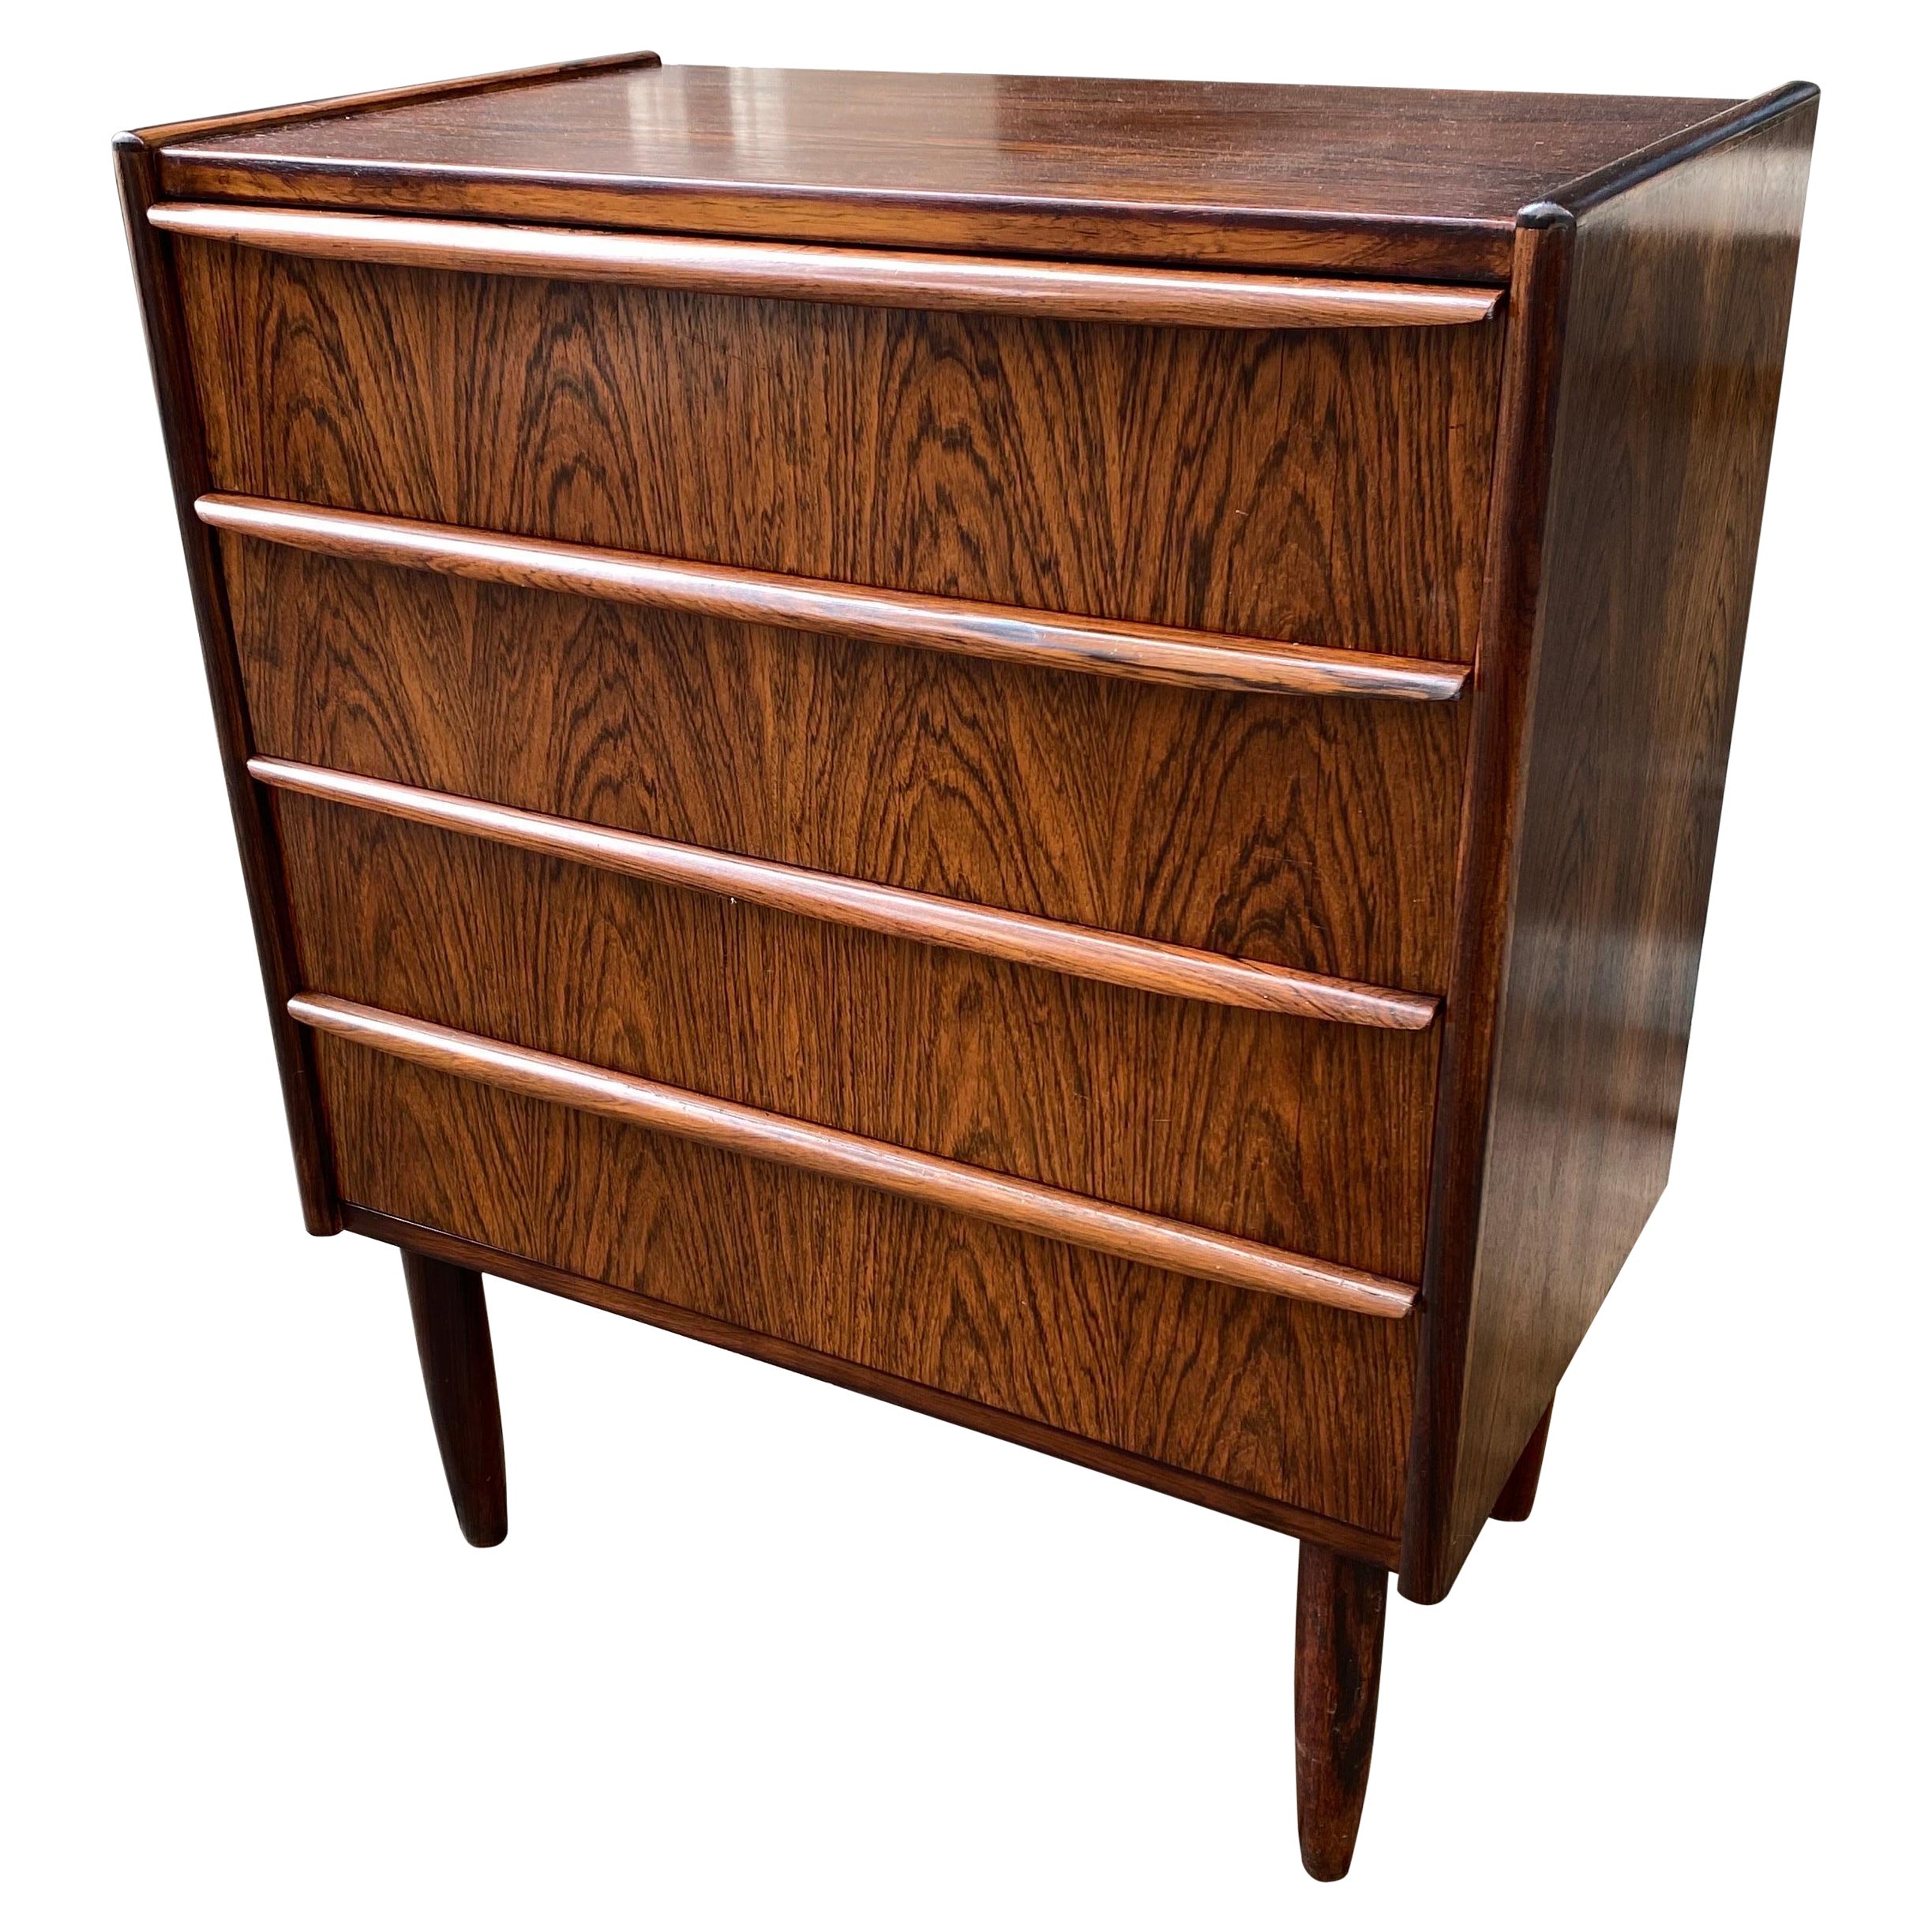 Danish Rosewood Small Dresser in the style of Arne Vodder